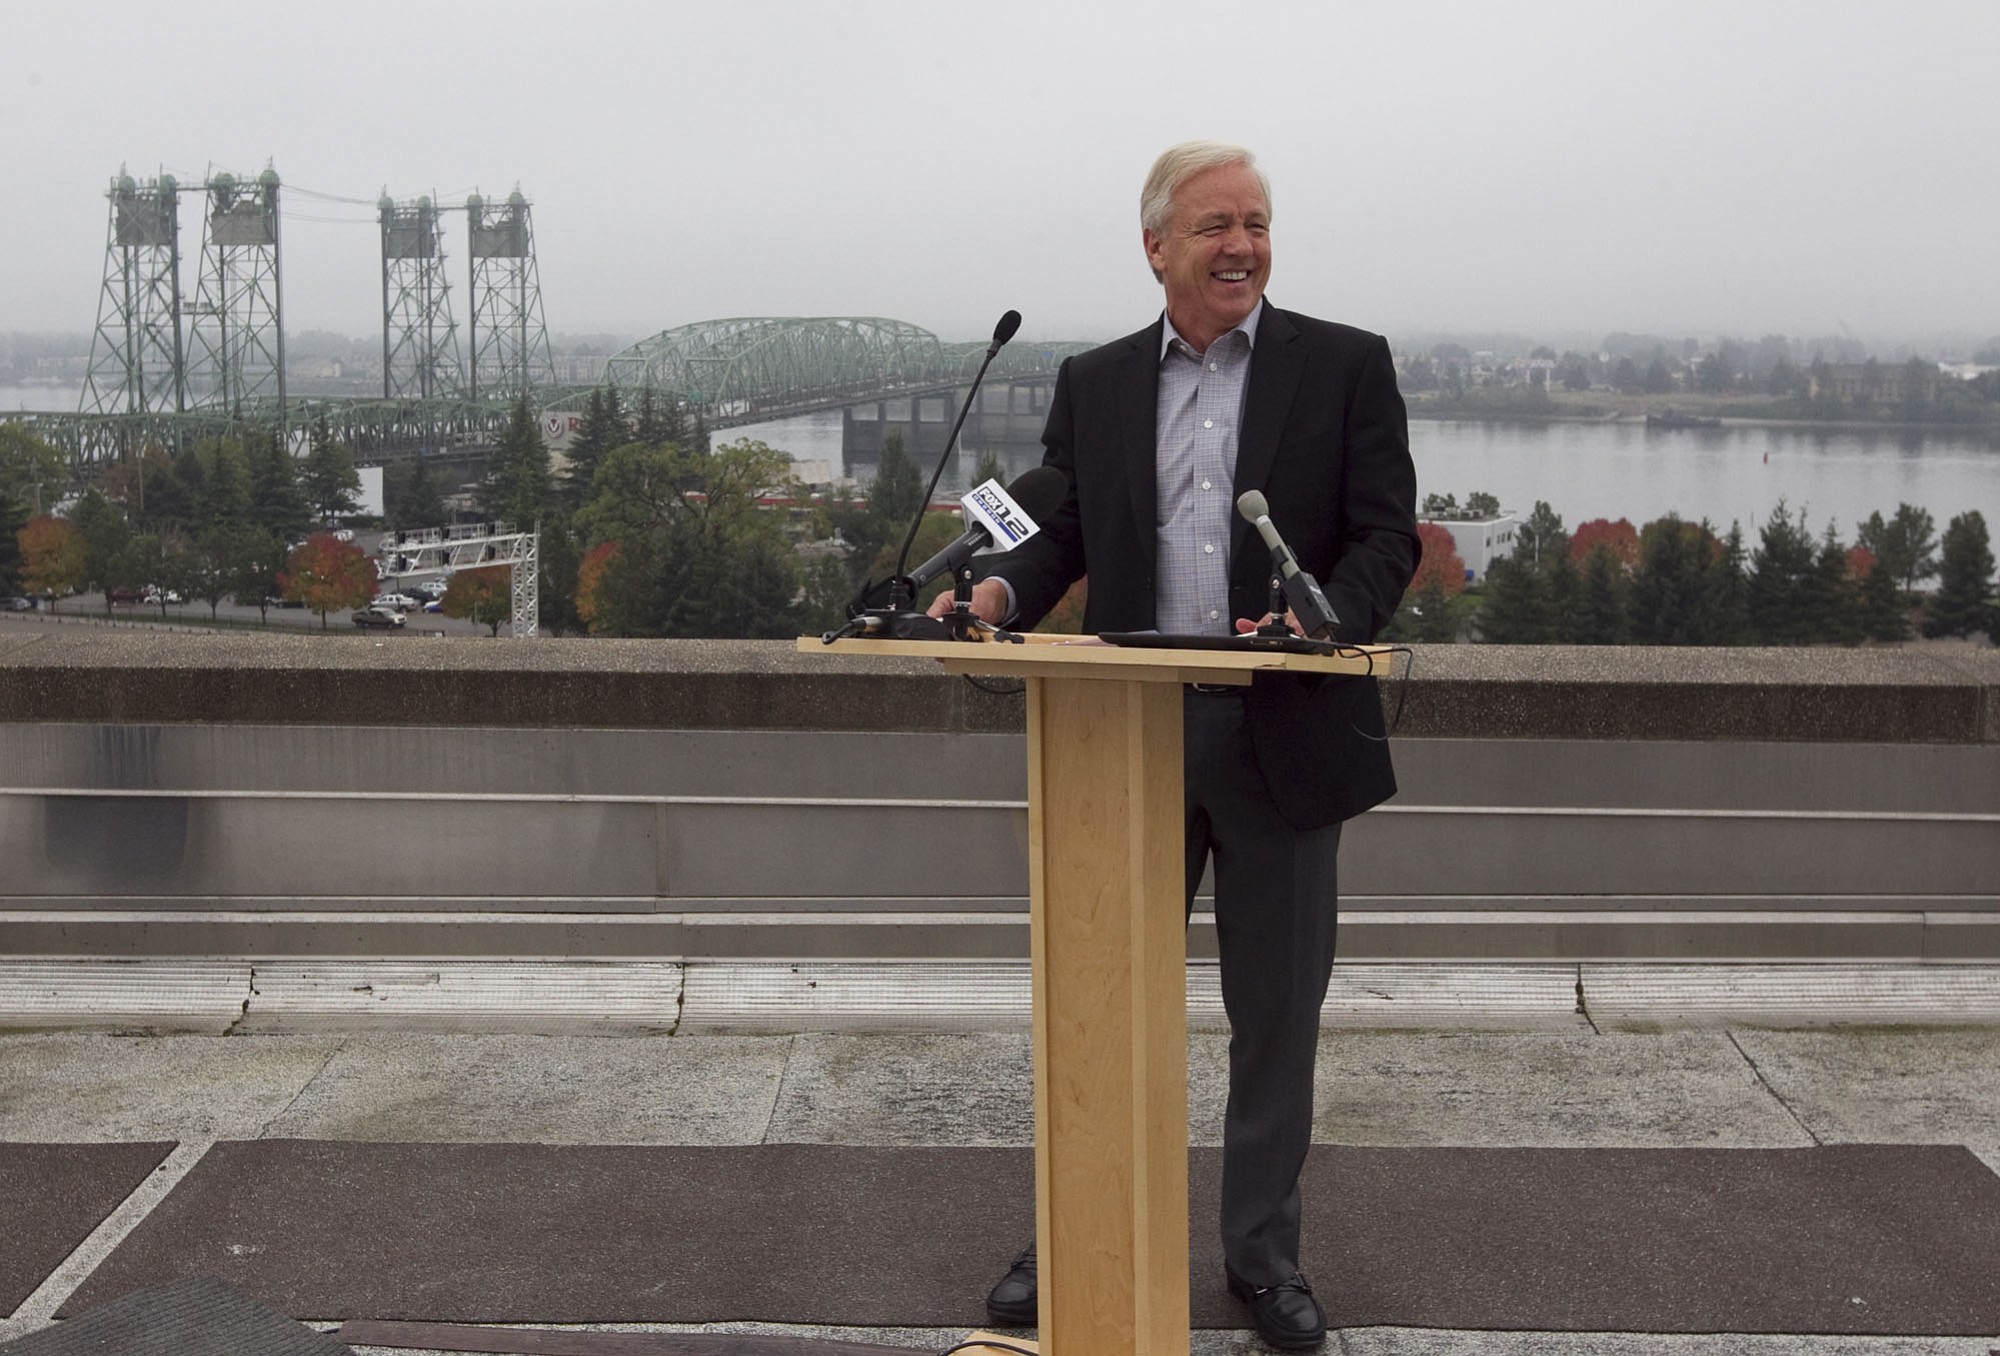 Barry Cain, who spoke to the press on the roof of city hall in Vancouver in October, announced Thursday that the waterfront development project has commitments from a 10-story hotel and three restaurants.